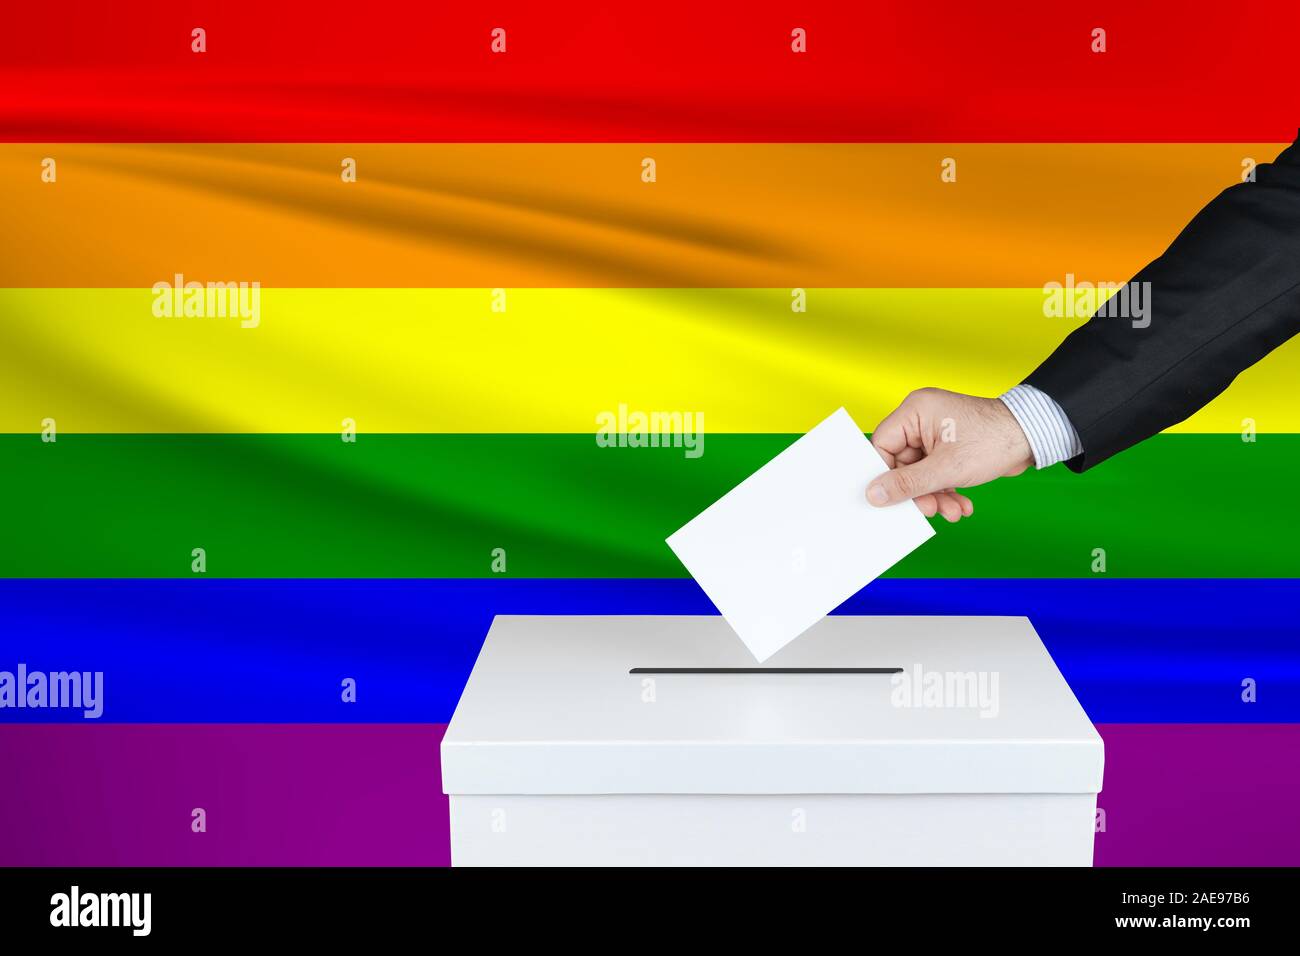 Election in Lgbt. The hand of man putting his vote in the ballot box. Waved Trans flag on background. Stock Photo